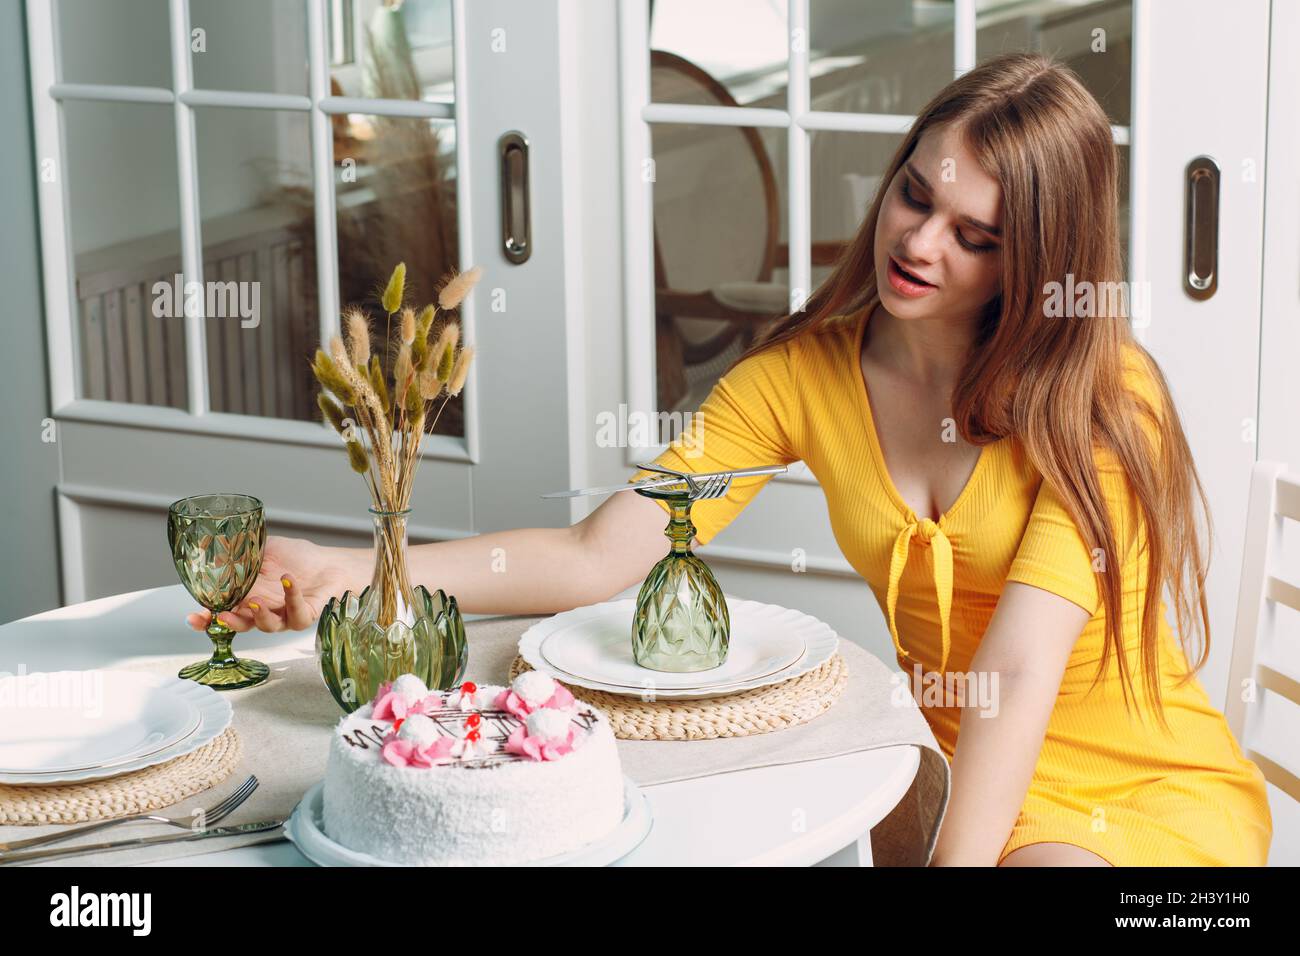 Young lonely woman sitting and boring alone at home or cafe with white birthday cake Stock Photo